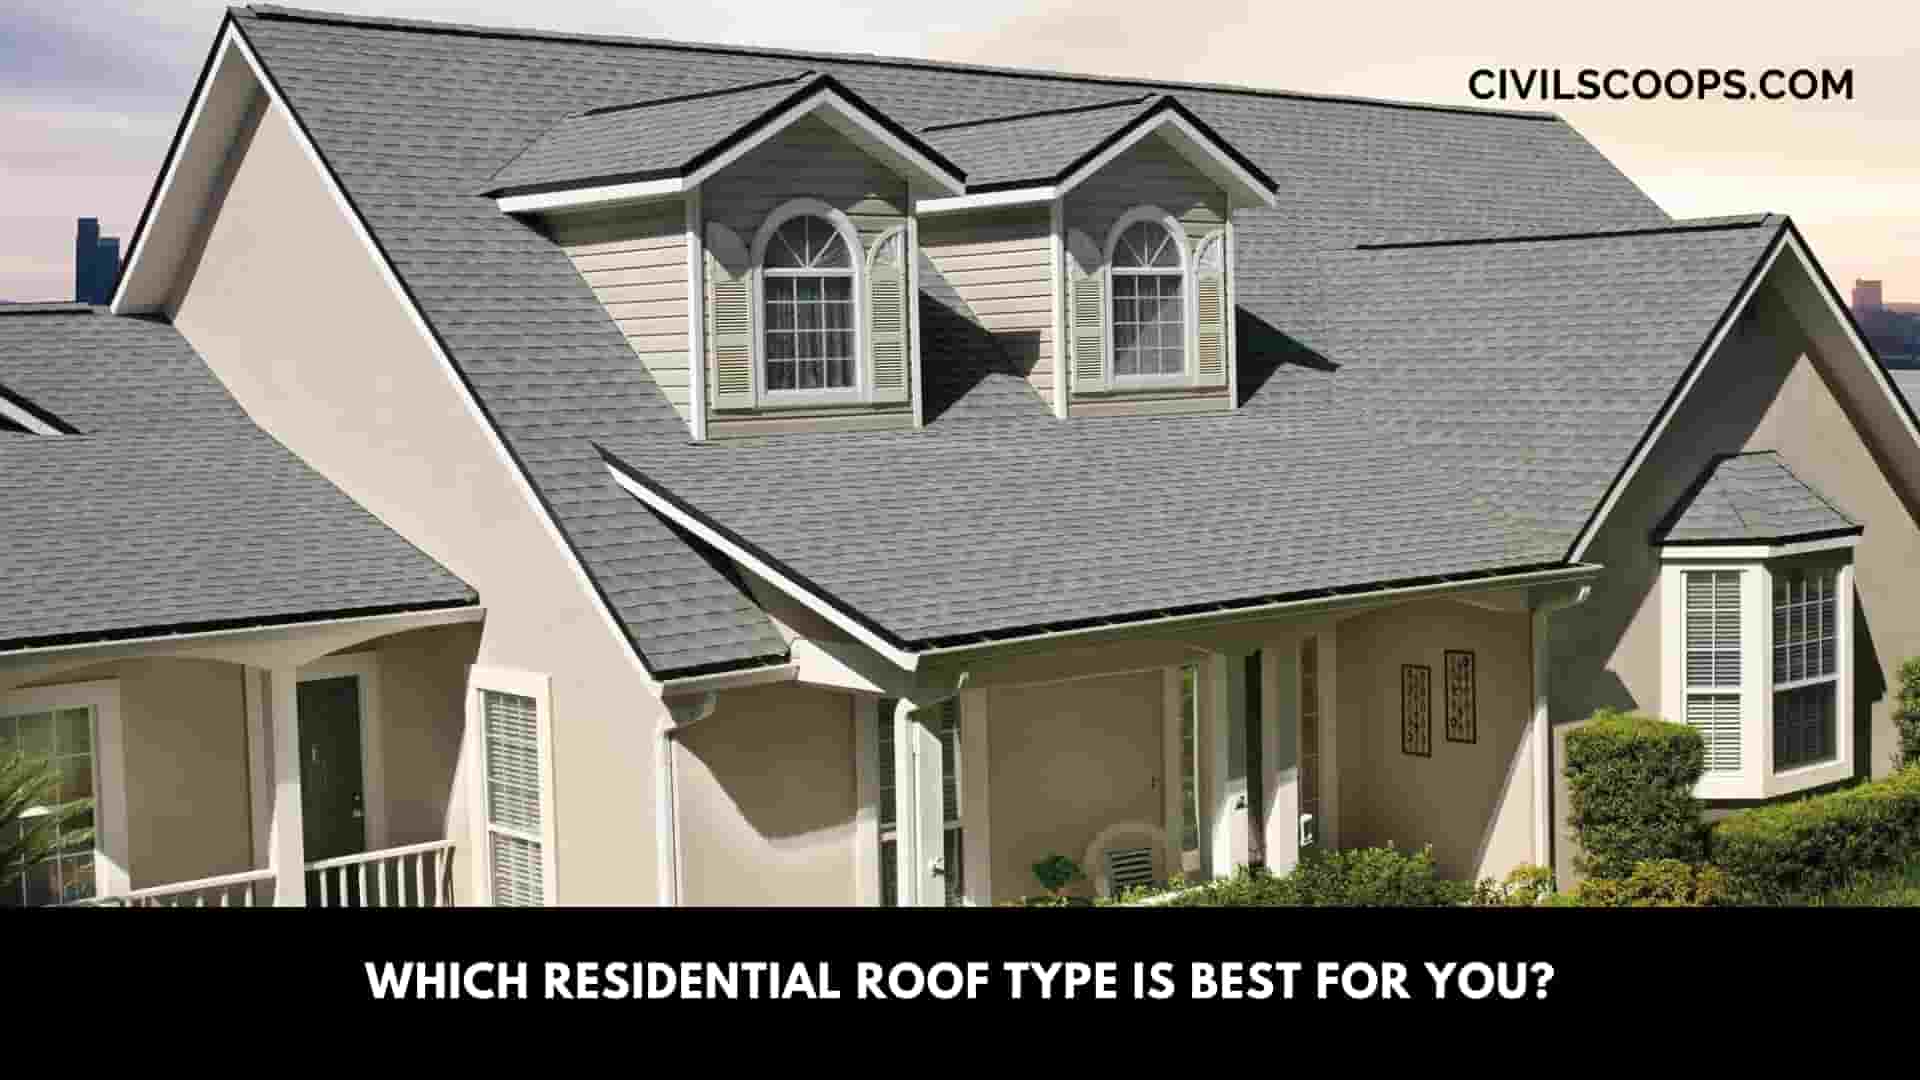 Which Residential Roof Type Is Best for You?